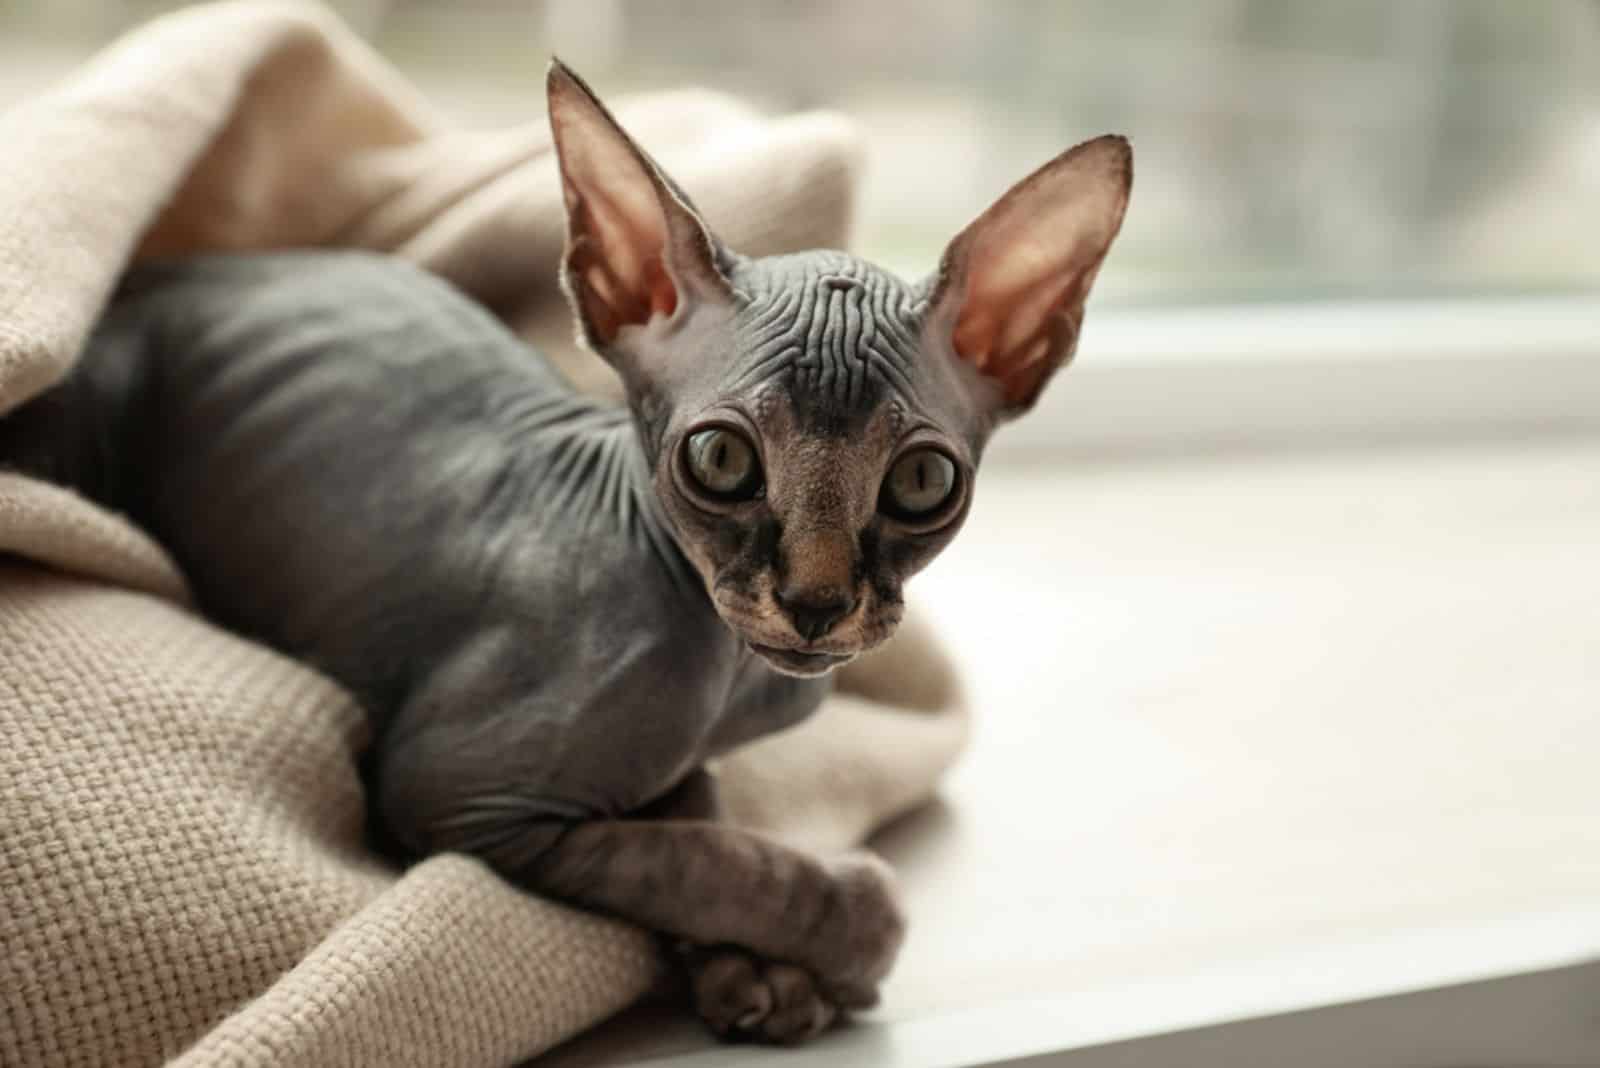 Adorable Sphynx kitten wrapped in plaid near window at home